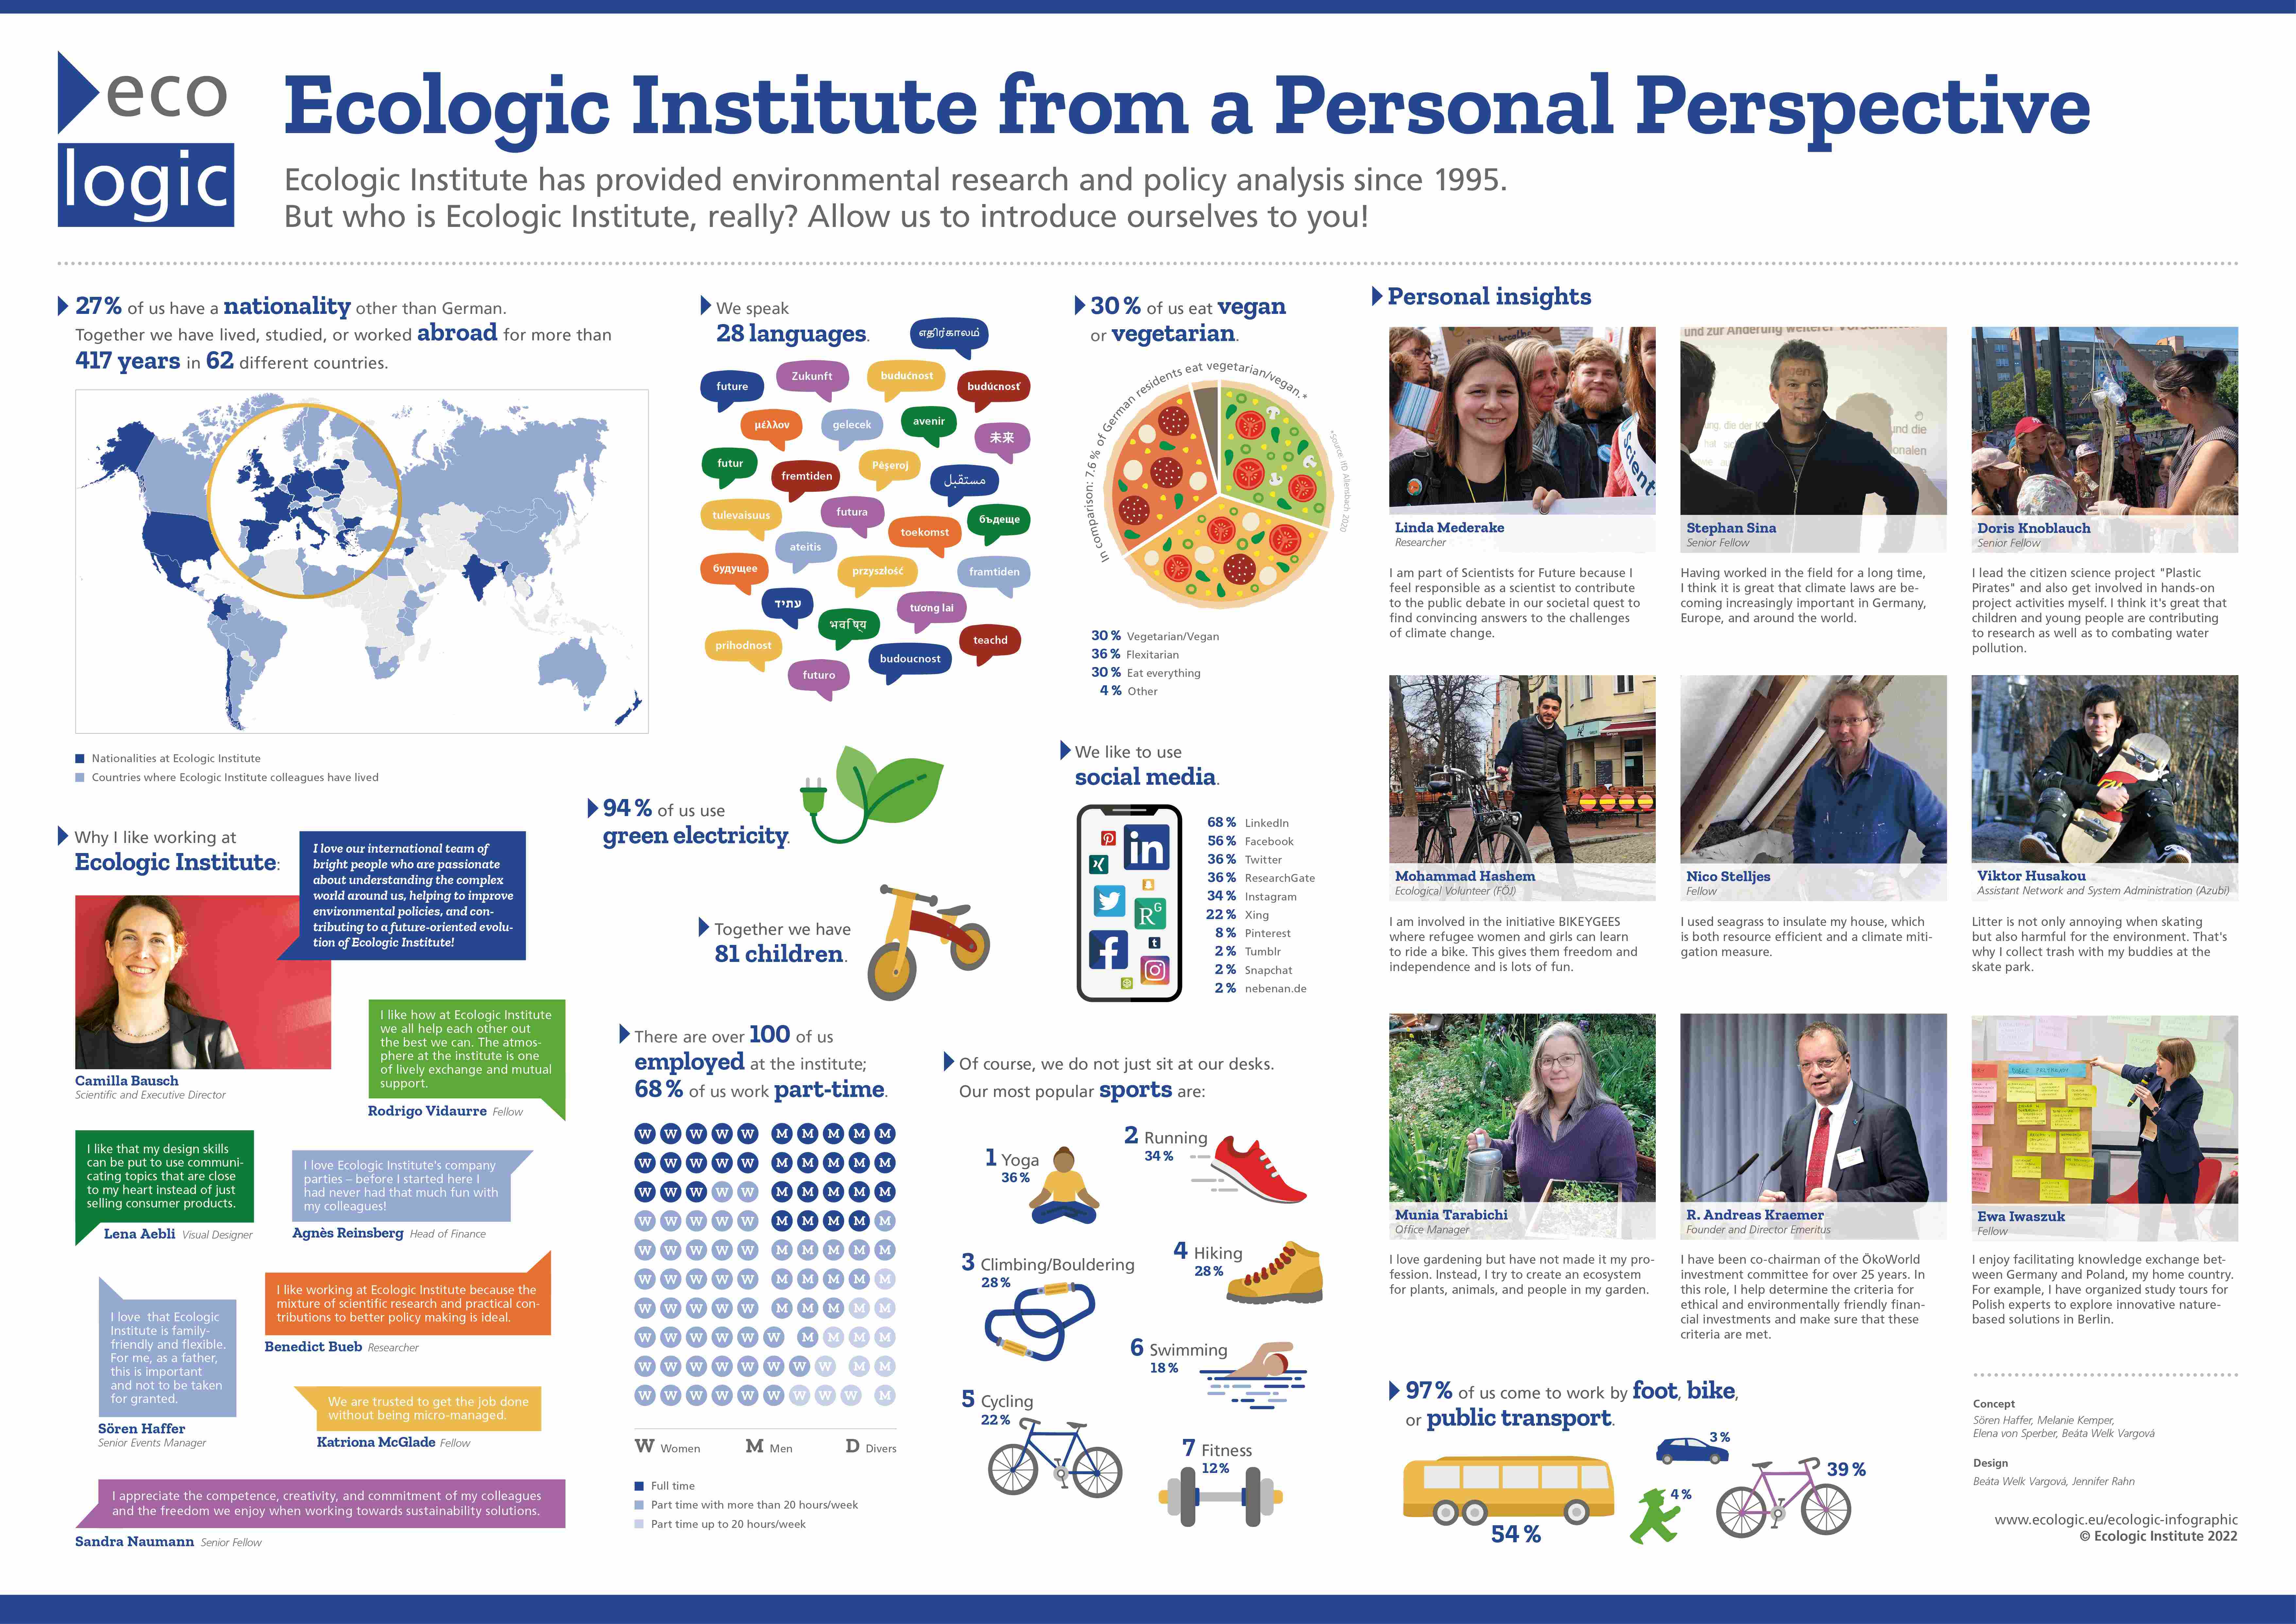 This image shows the infographic of Ecologic Institute